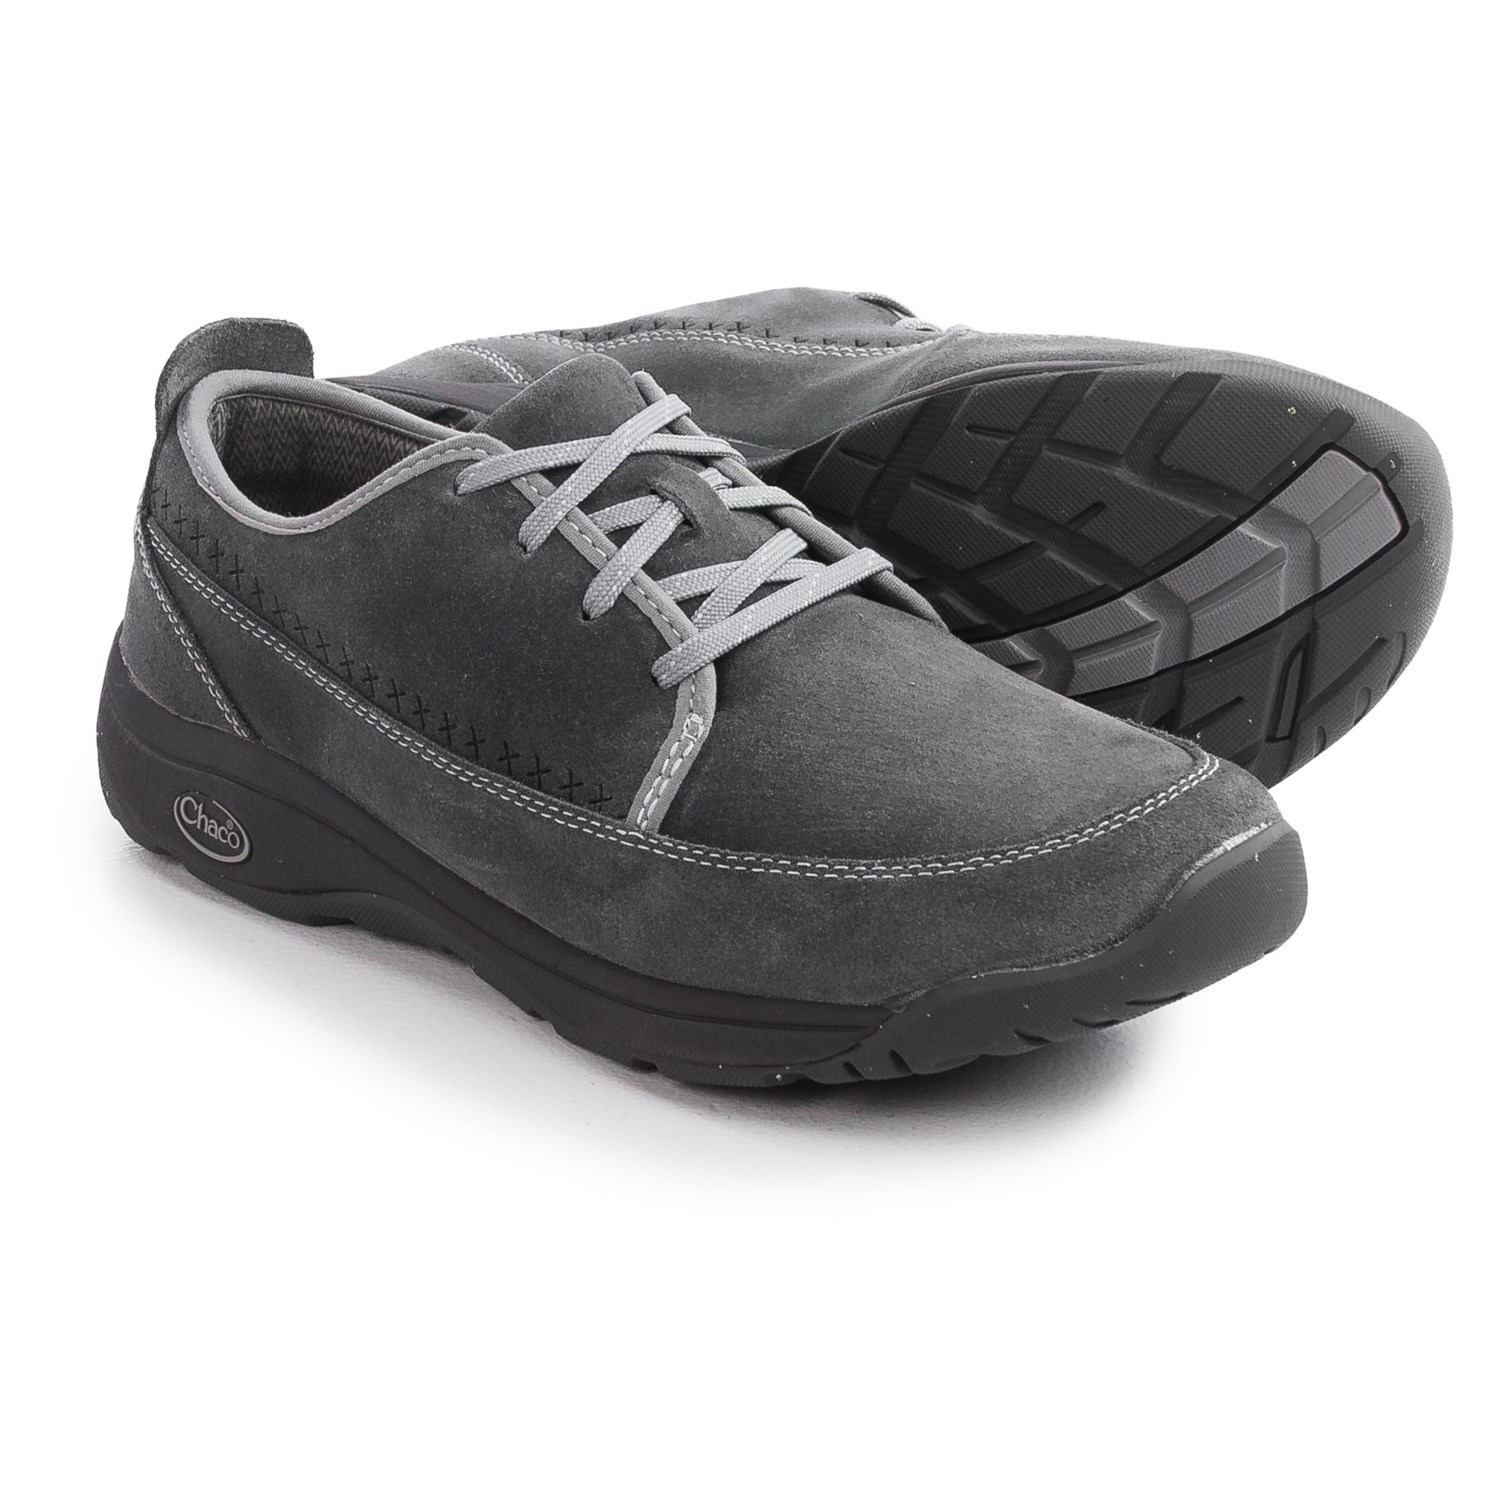 Chaco Everett Shoes (For Men) - Save 30%